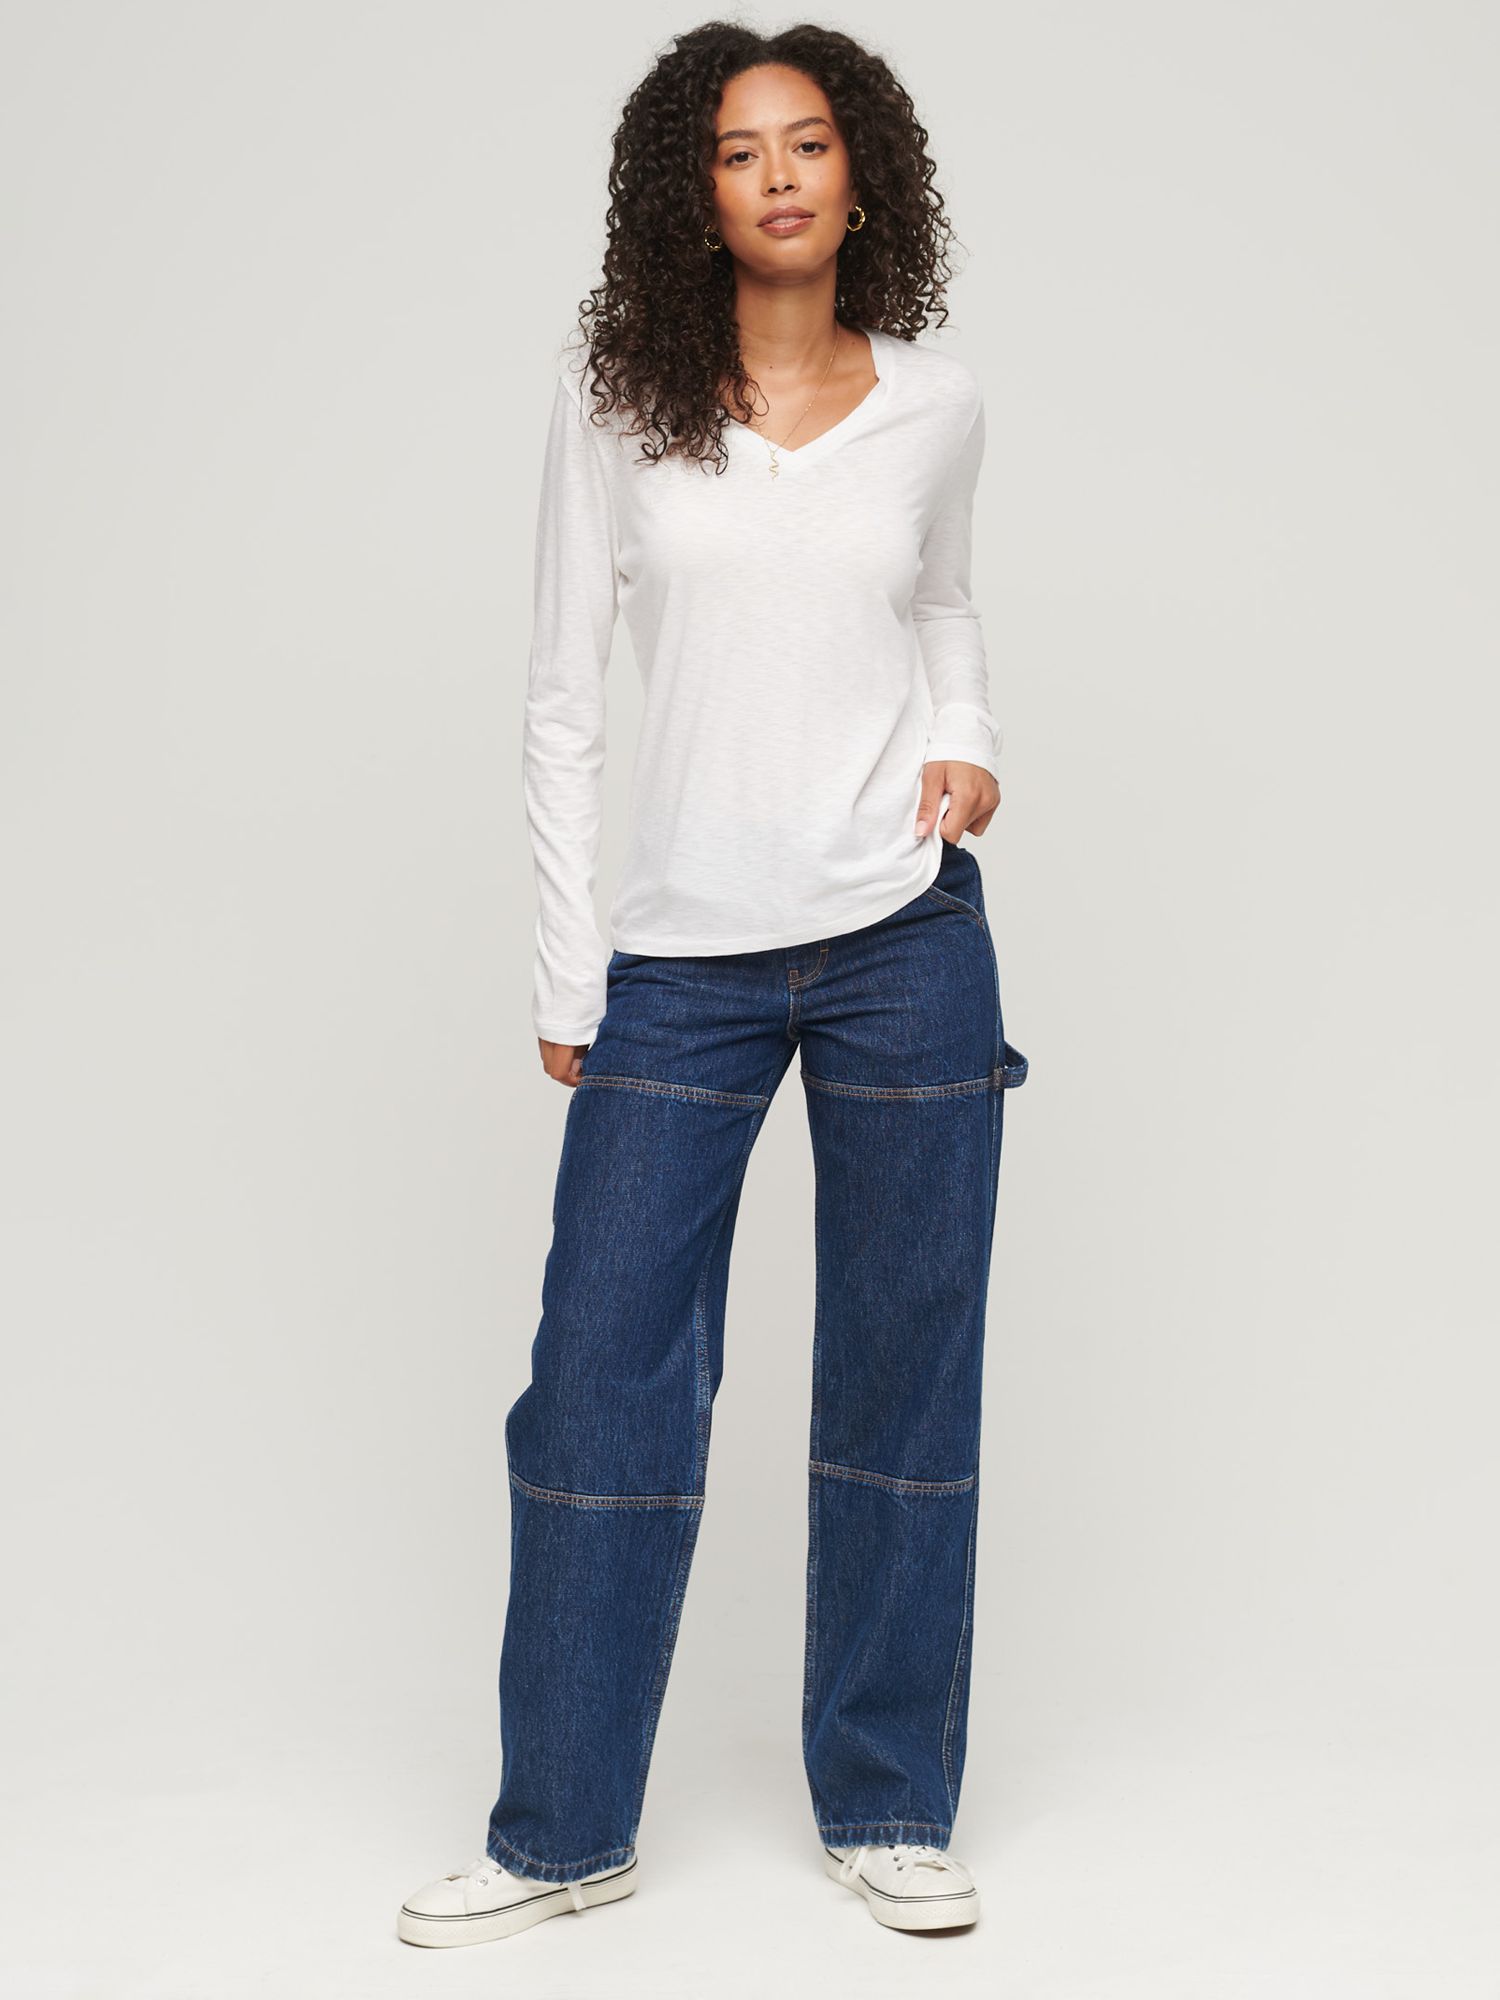 Superdry Long Sleeve Jersey White Top, at John V-Neck & Partners Optic Lewis